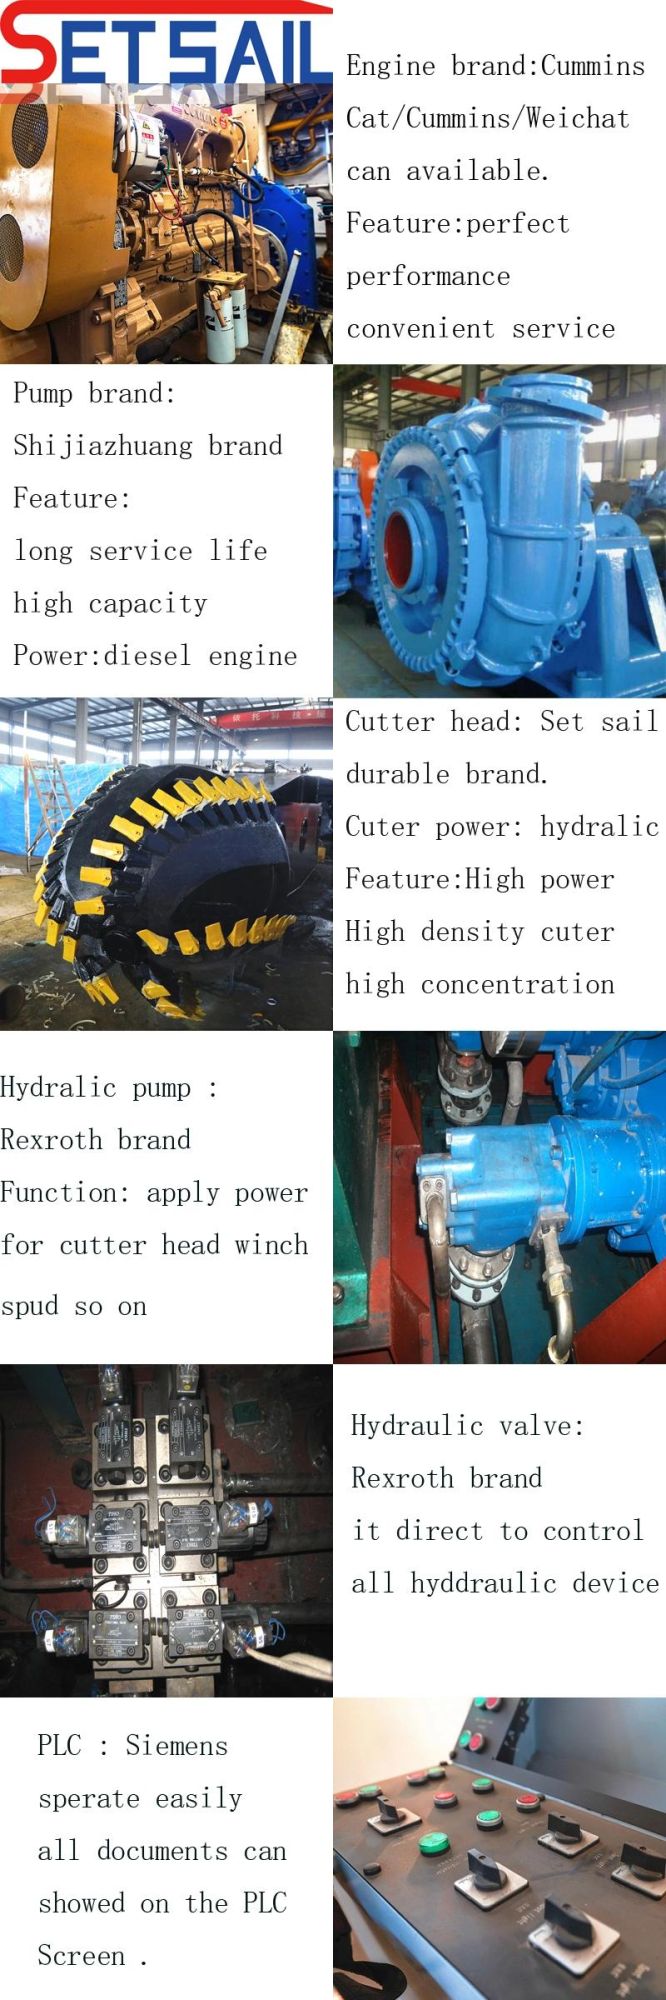 High Efficiency 28inch Cutter Suction Dredger with Underwater Sand Pump